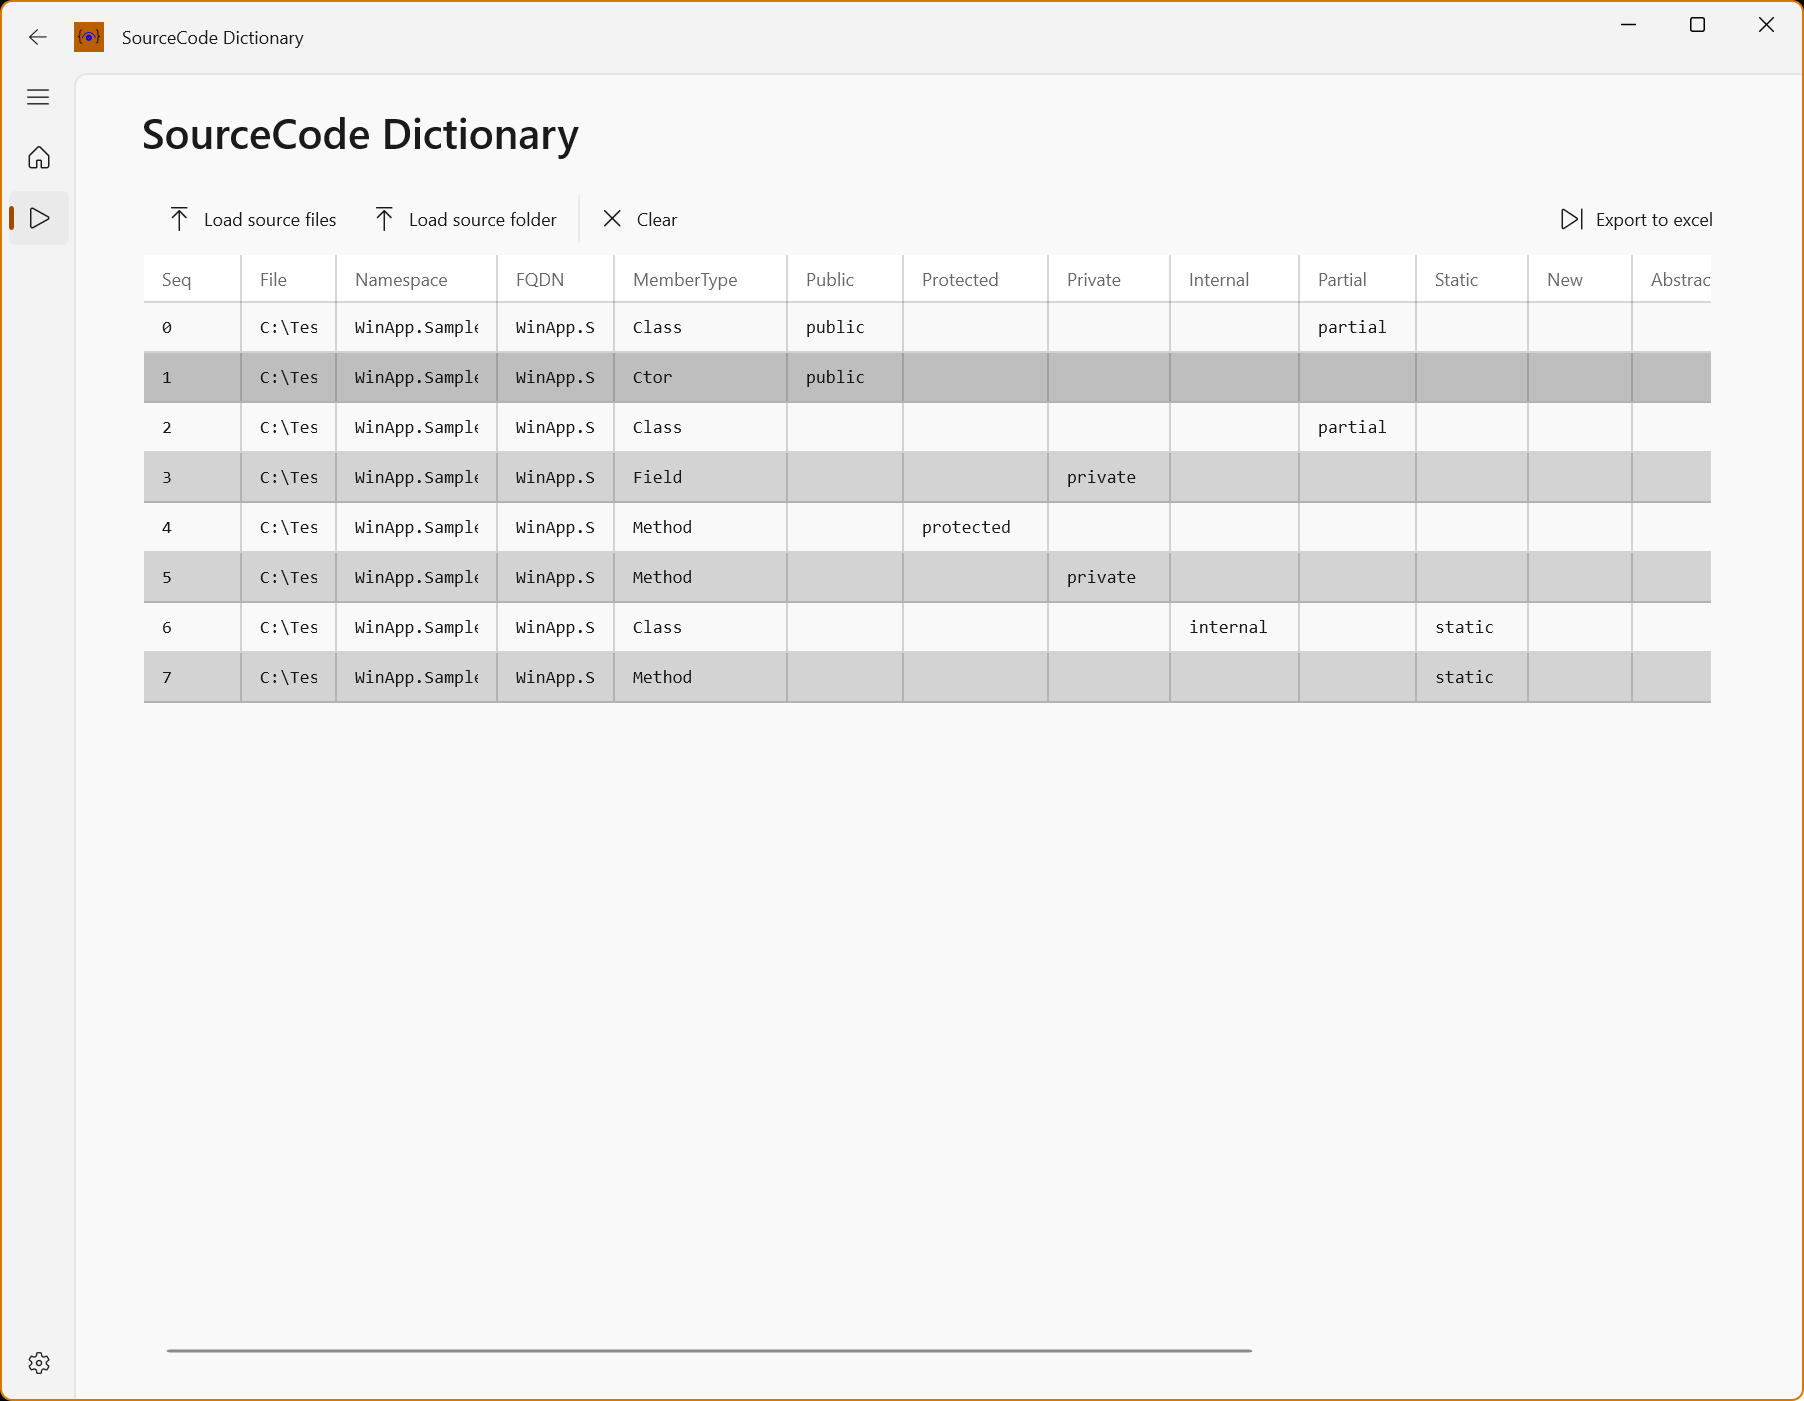 SourceCode Dictionary